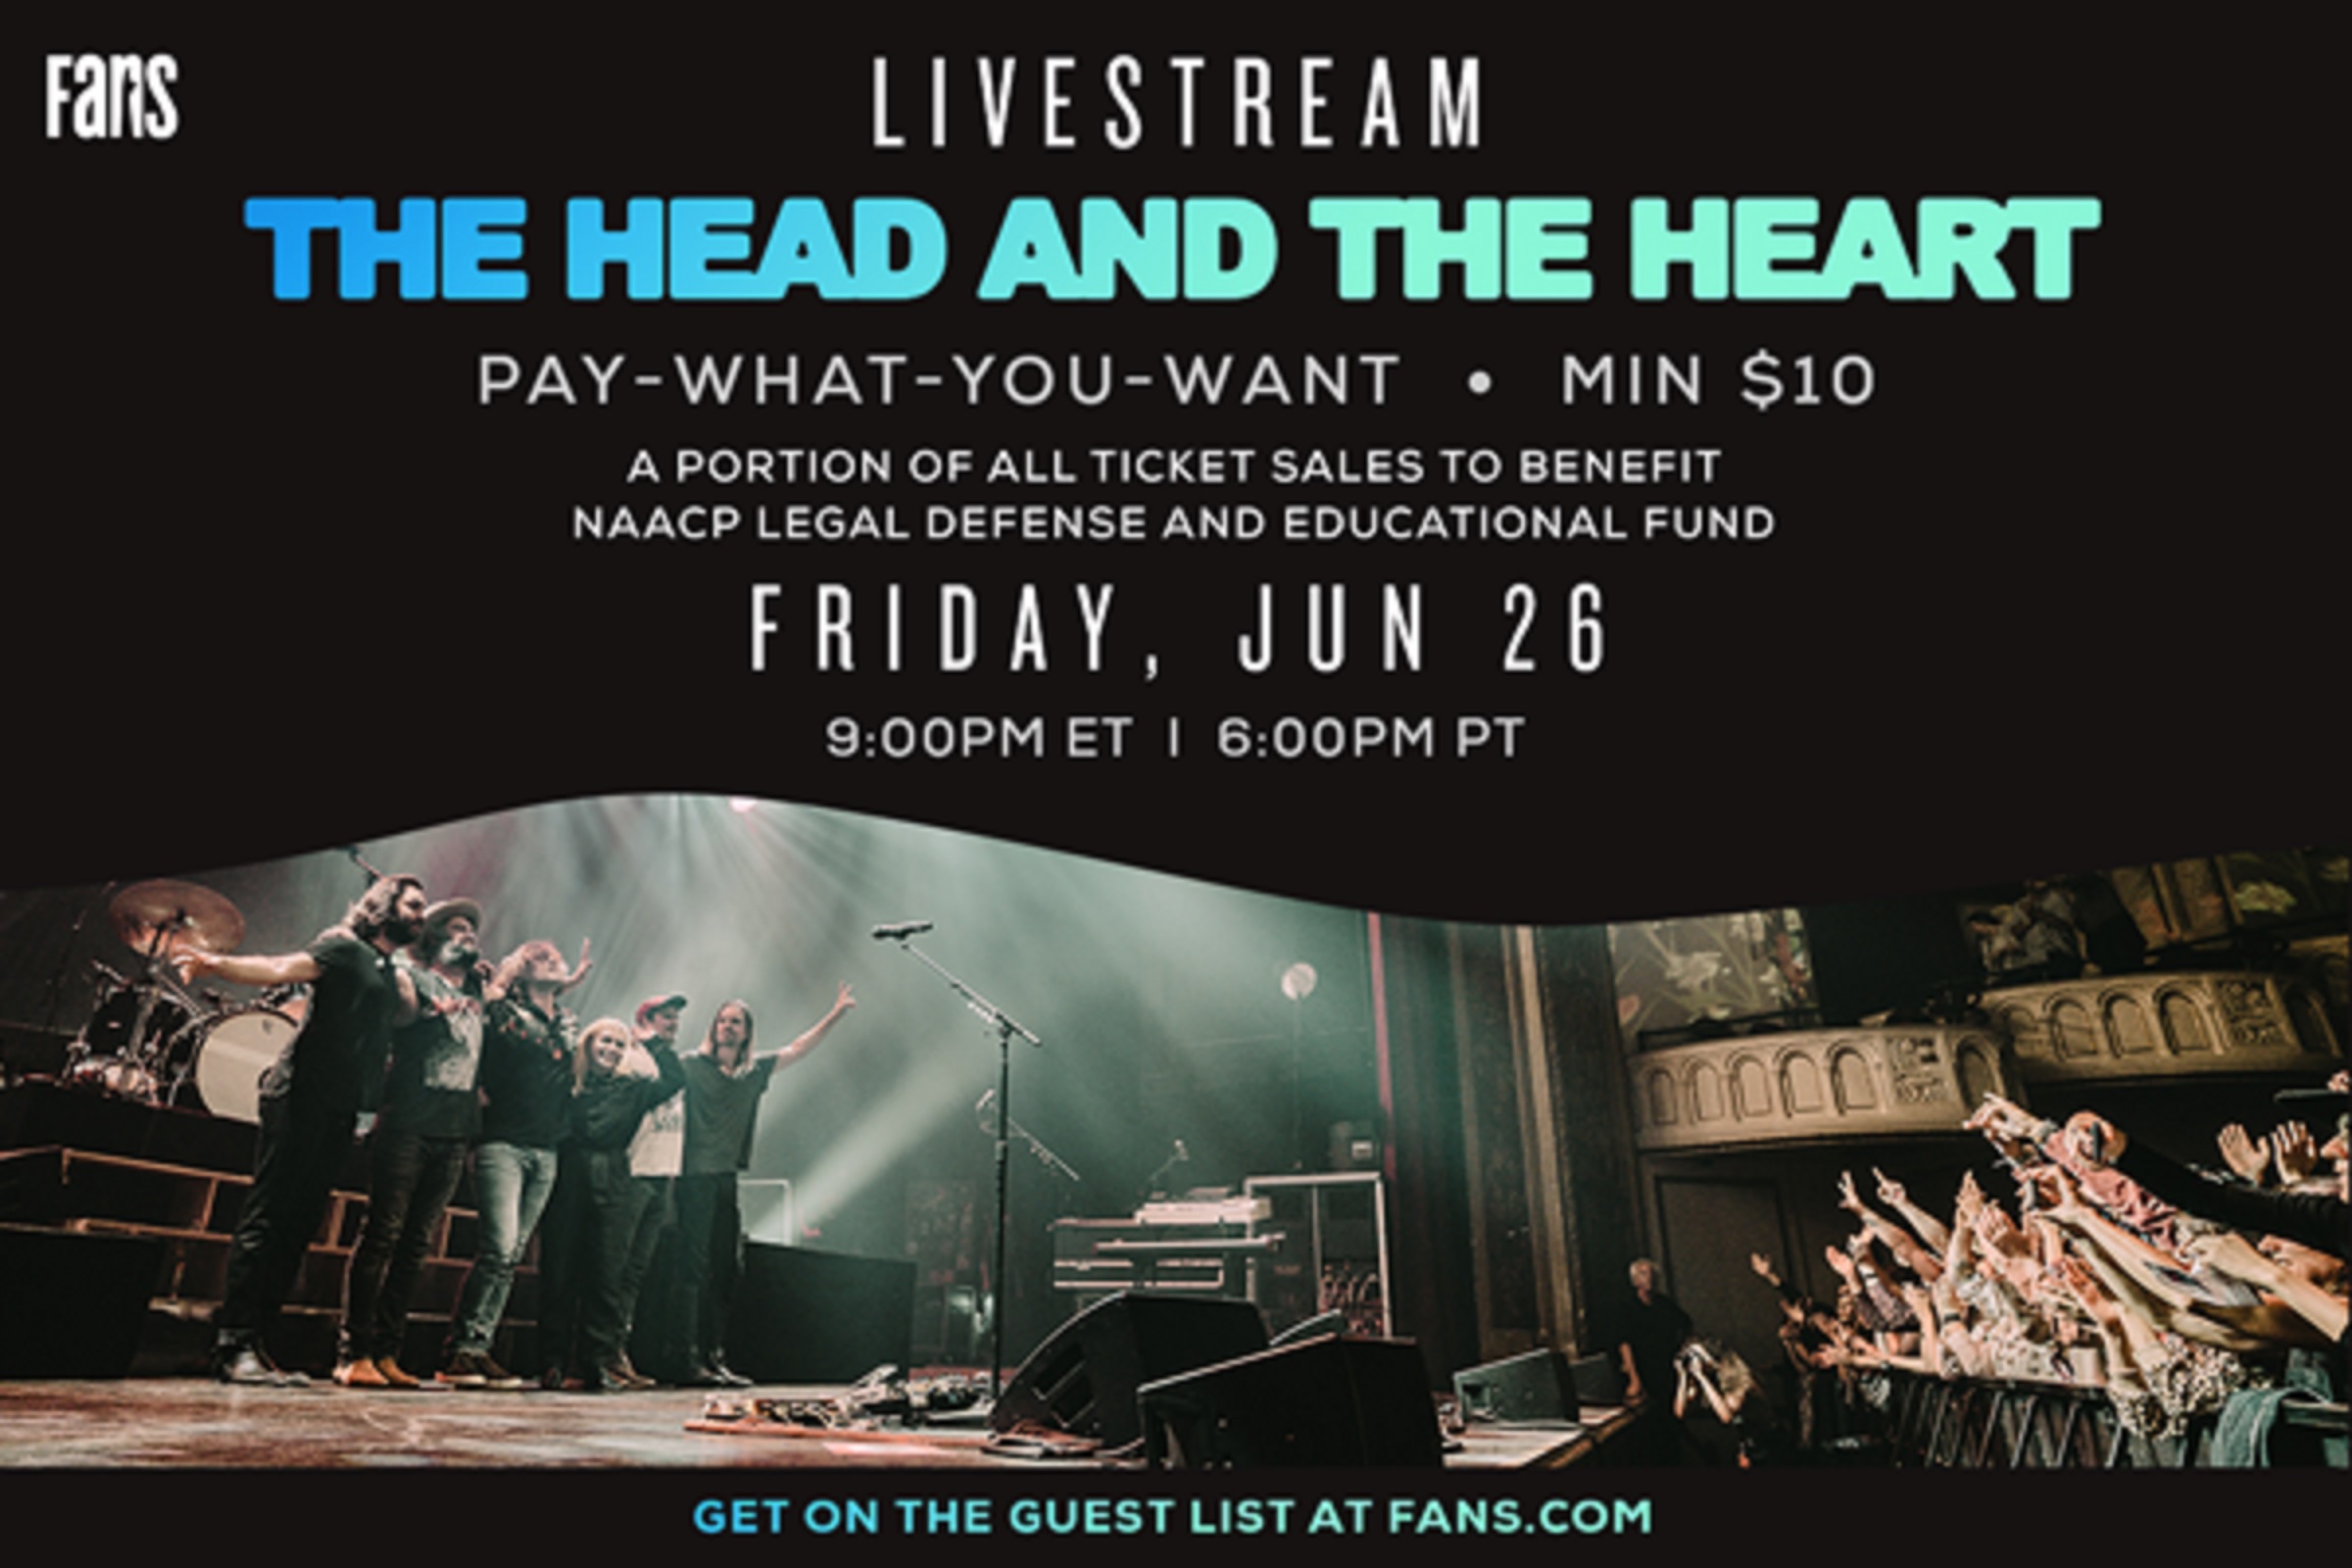 The Head and The Heart livestream to benefit NAACP Legal Defense